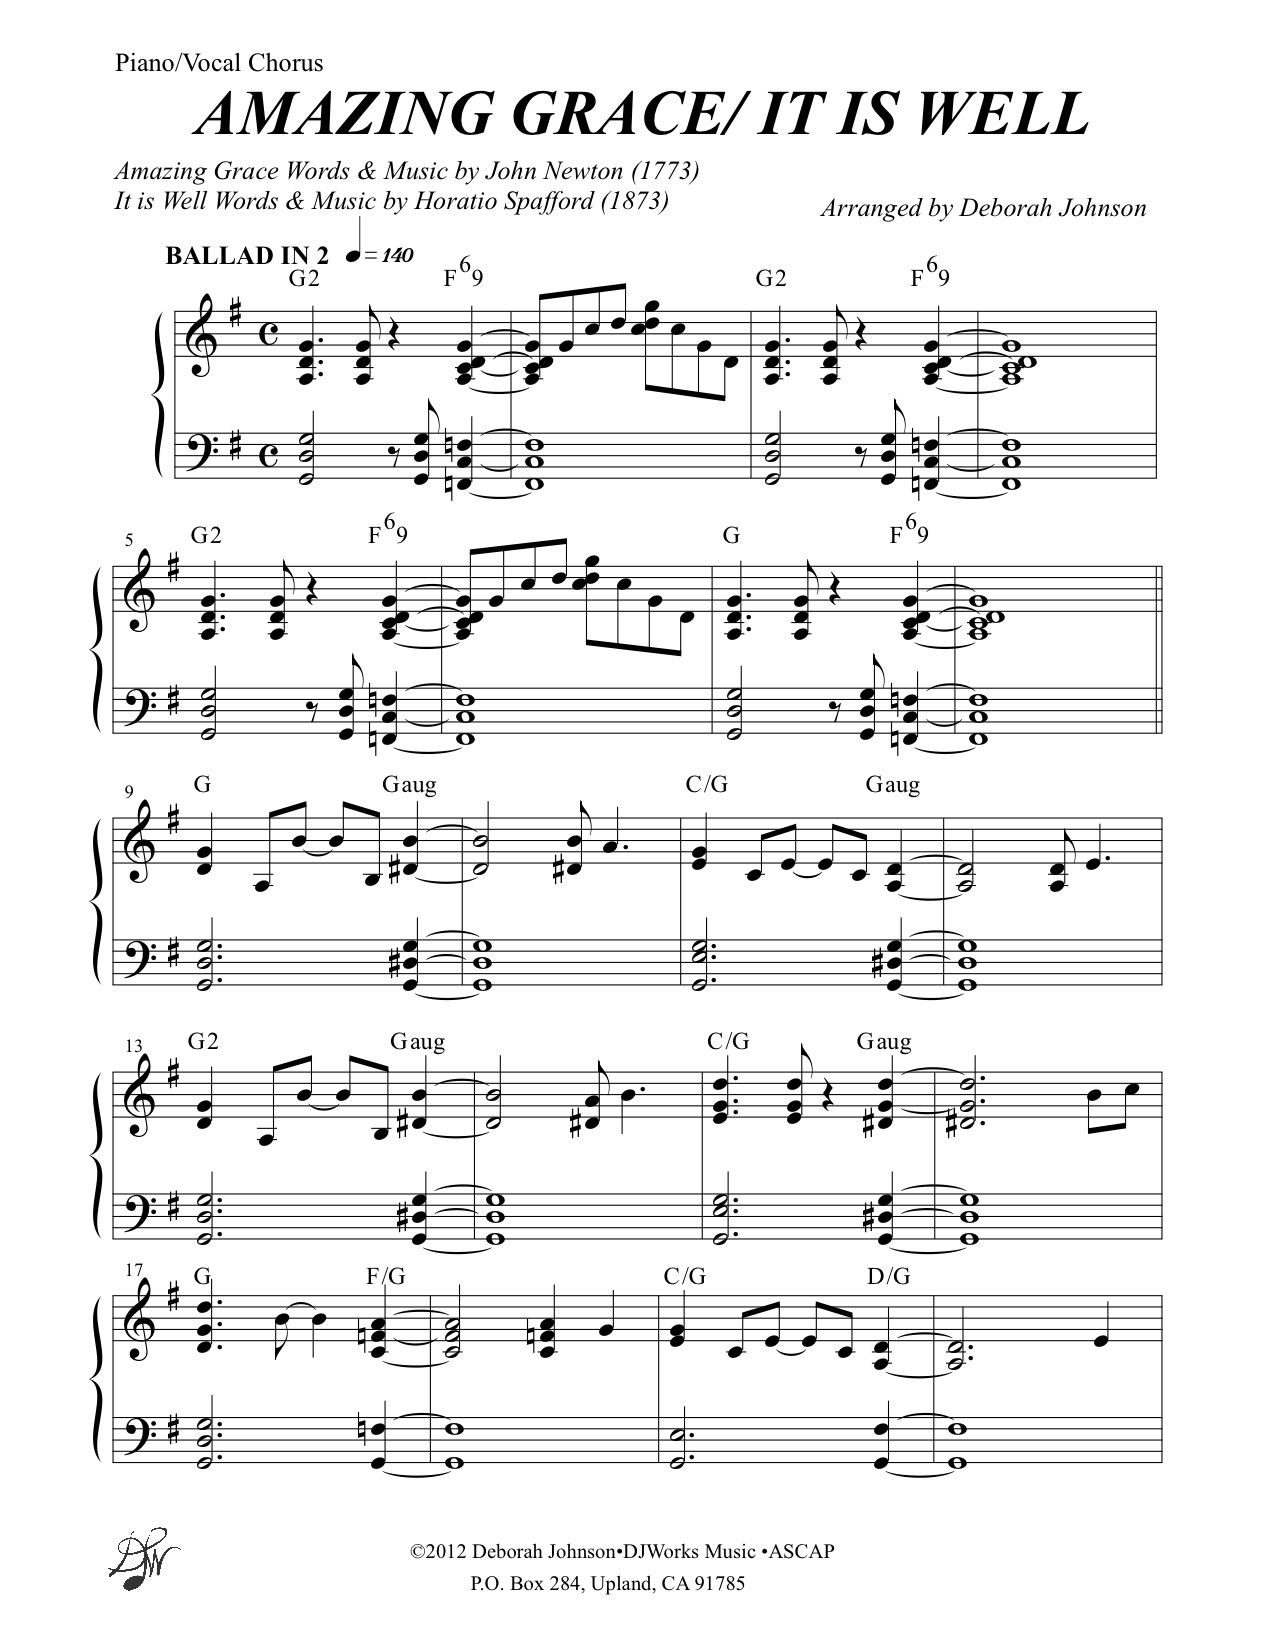 Advanced Amazing Grace Sheet Music Piano / Free Choir Sheet Music - Amazing Grace - Michael Kravchuk : In future lessons i'll also do teach you how to play some more advanced arrangement of amazing grace on piano as well as some other hymns too.